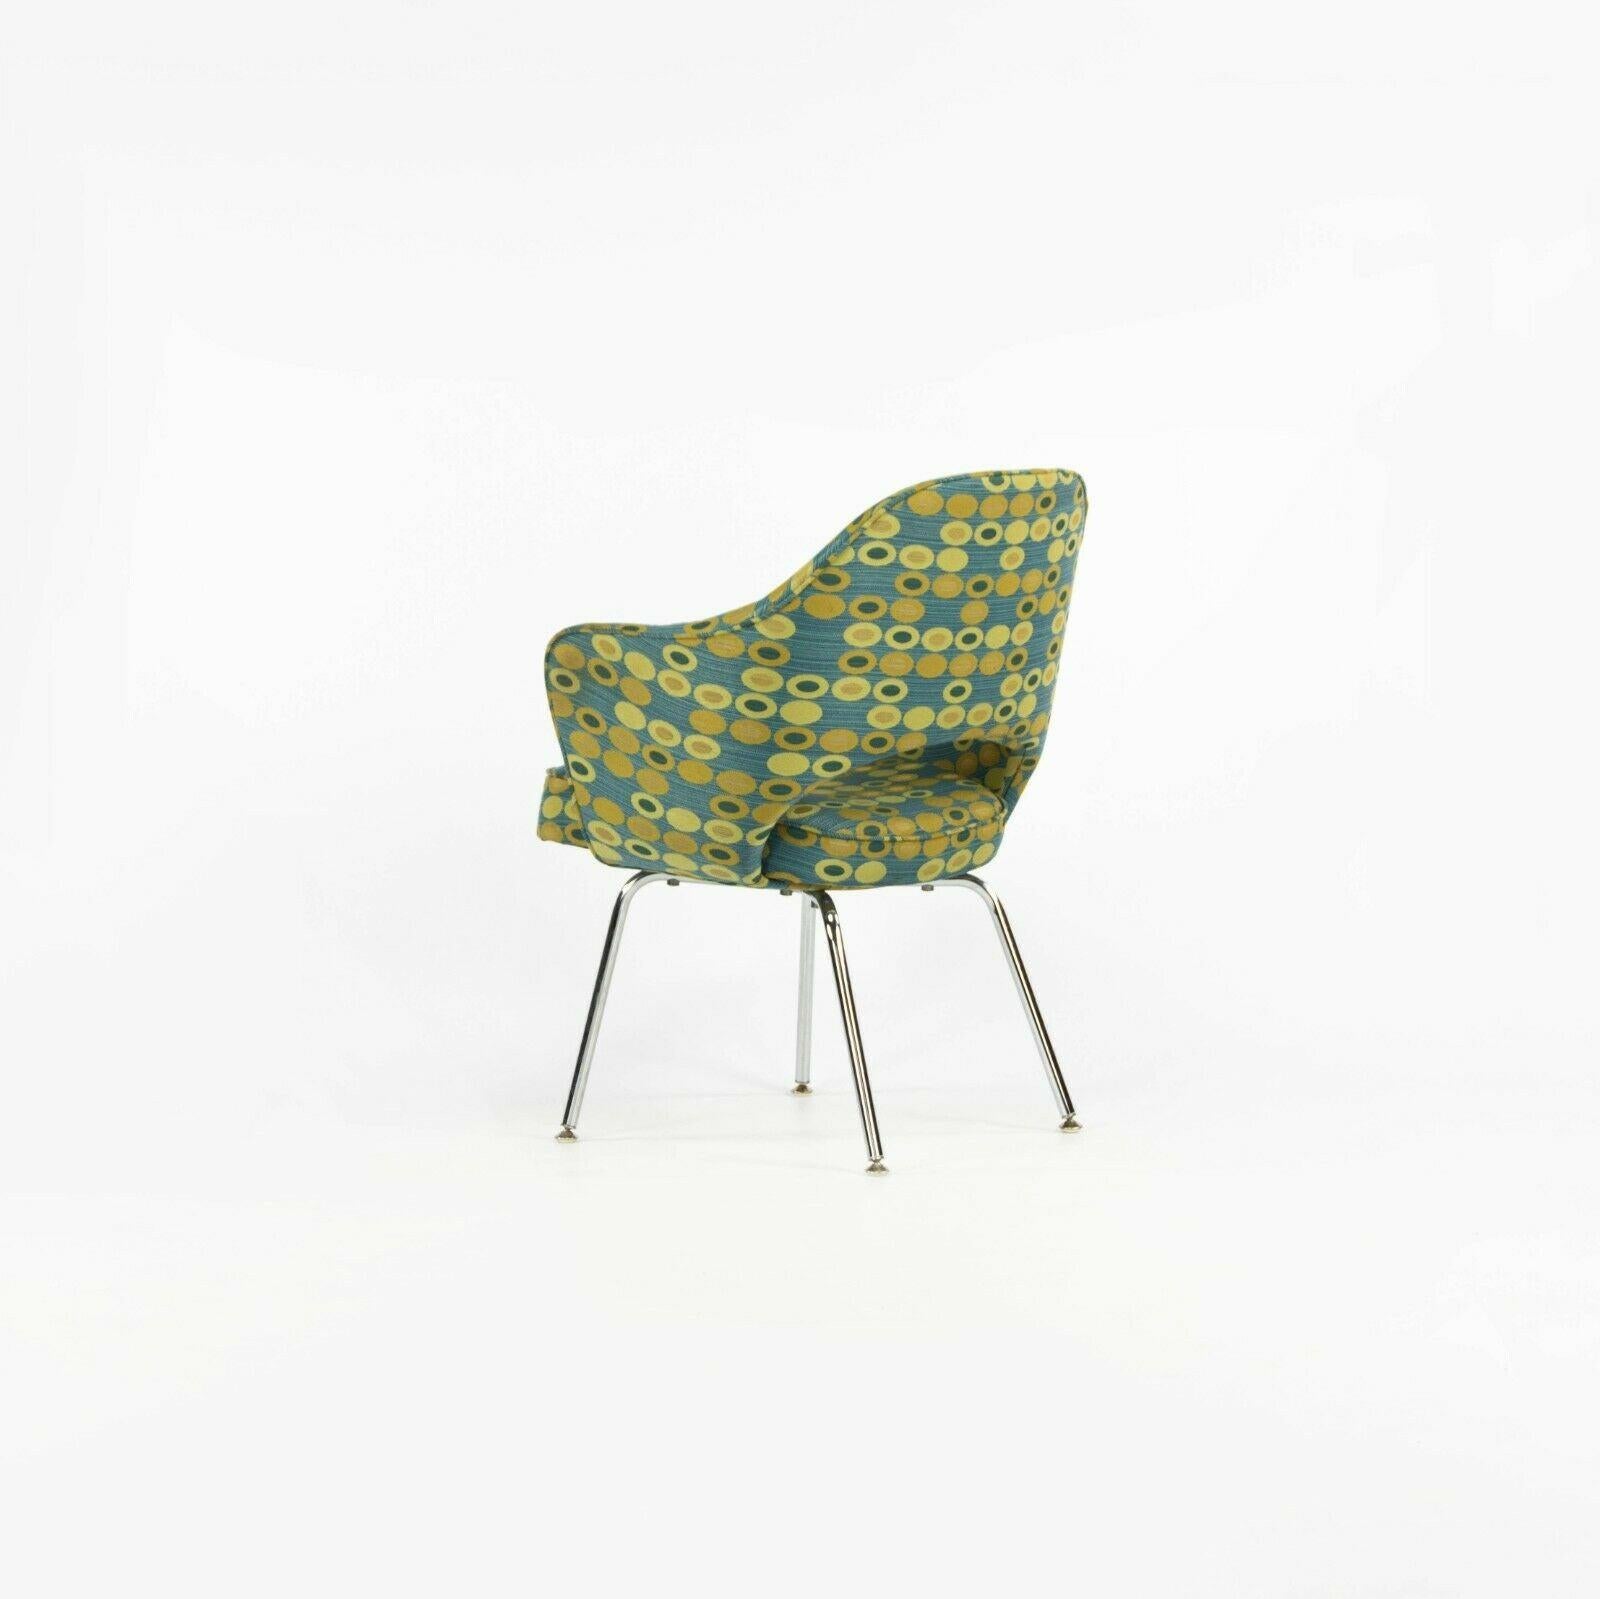 Contemporary 2008 Eero Saarinen for Knoll Executive Dining Arm Chair Abacus Fabric For Sale